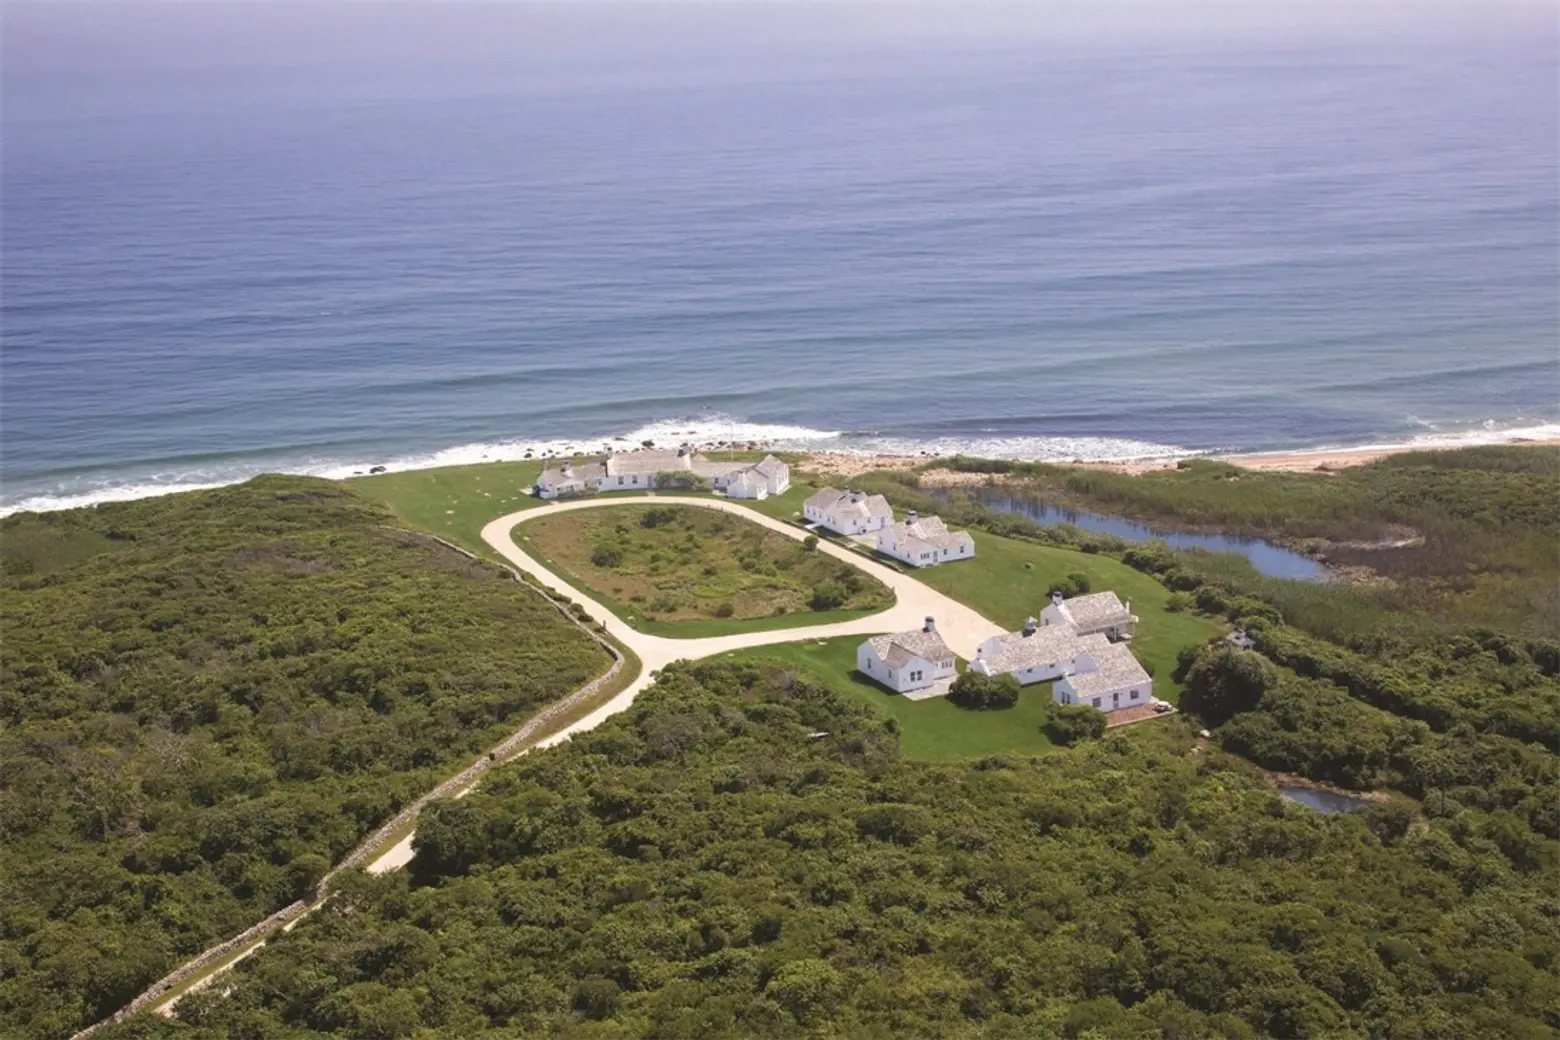 16 Cliff Drive and 8 Old Montauk Highway, And Warhol Montauk Compound. andy warhol compound, andy warhol mansion, andy warhol estate, andy warhol compound, andy warhol montauk